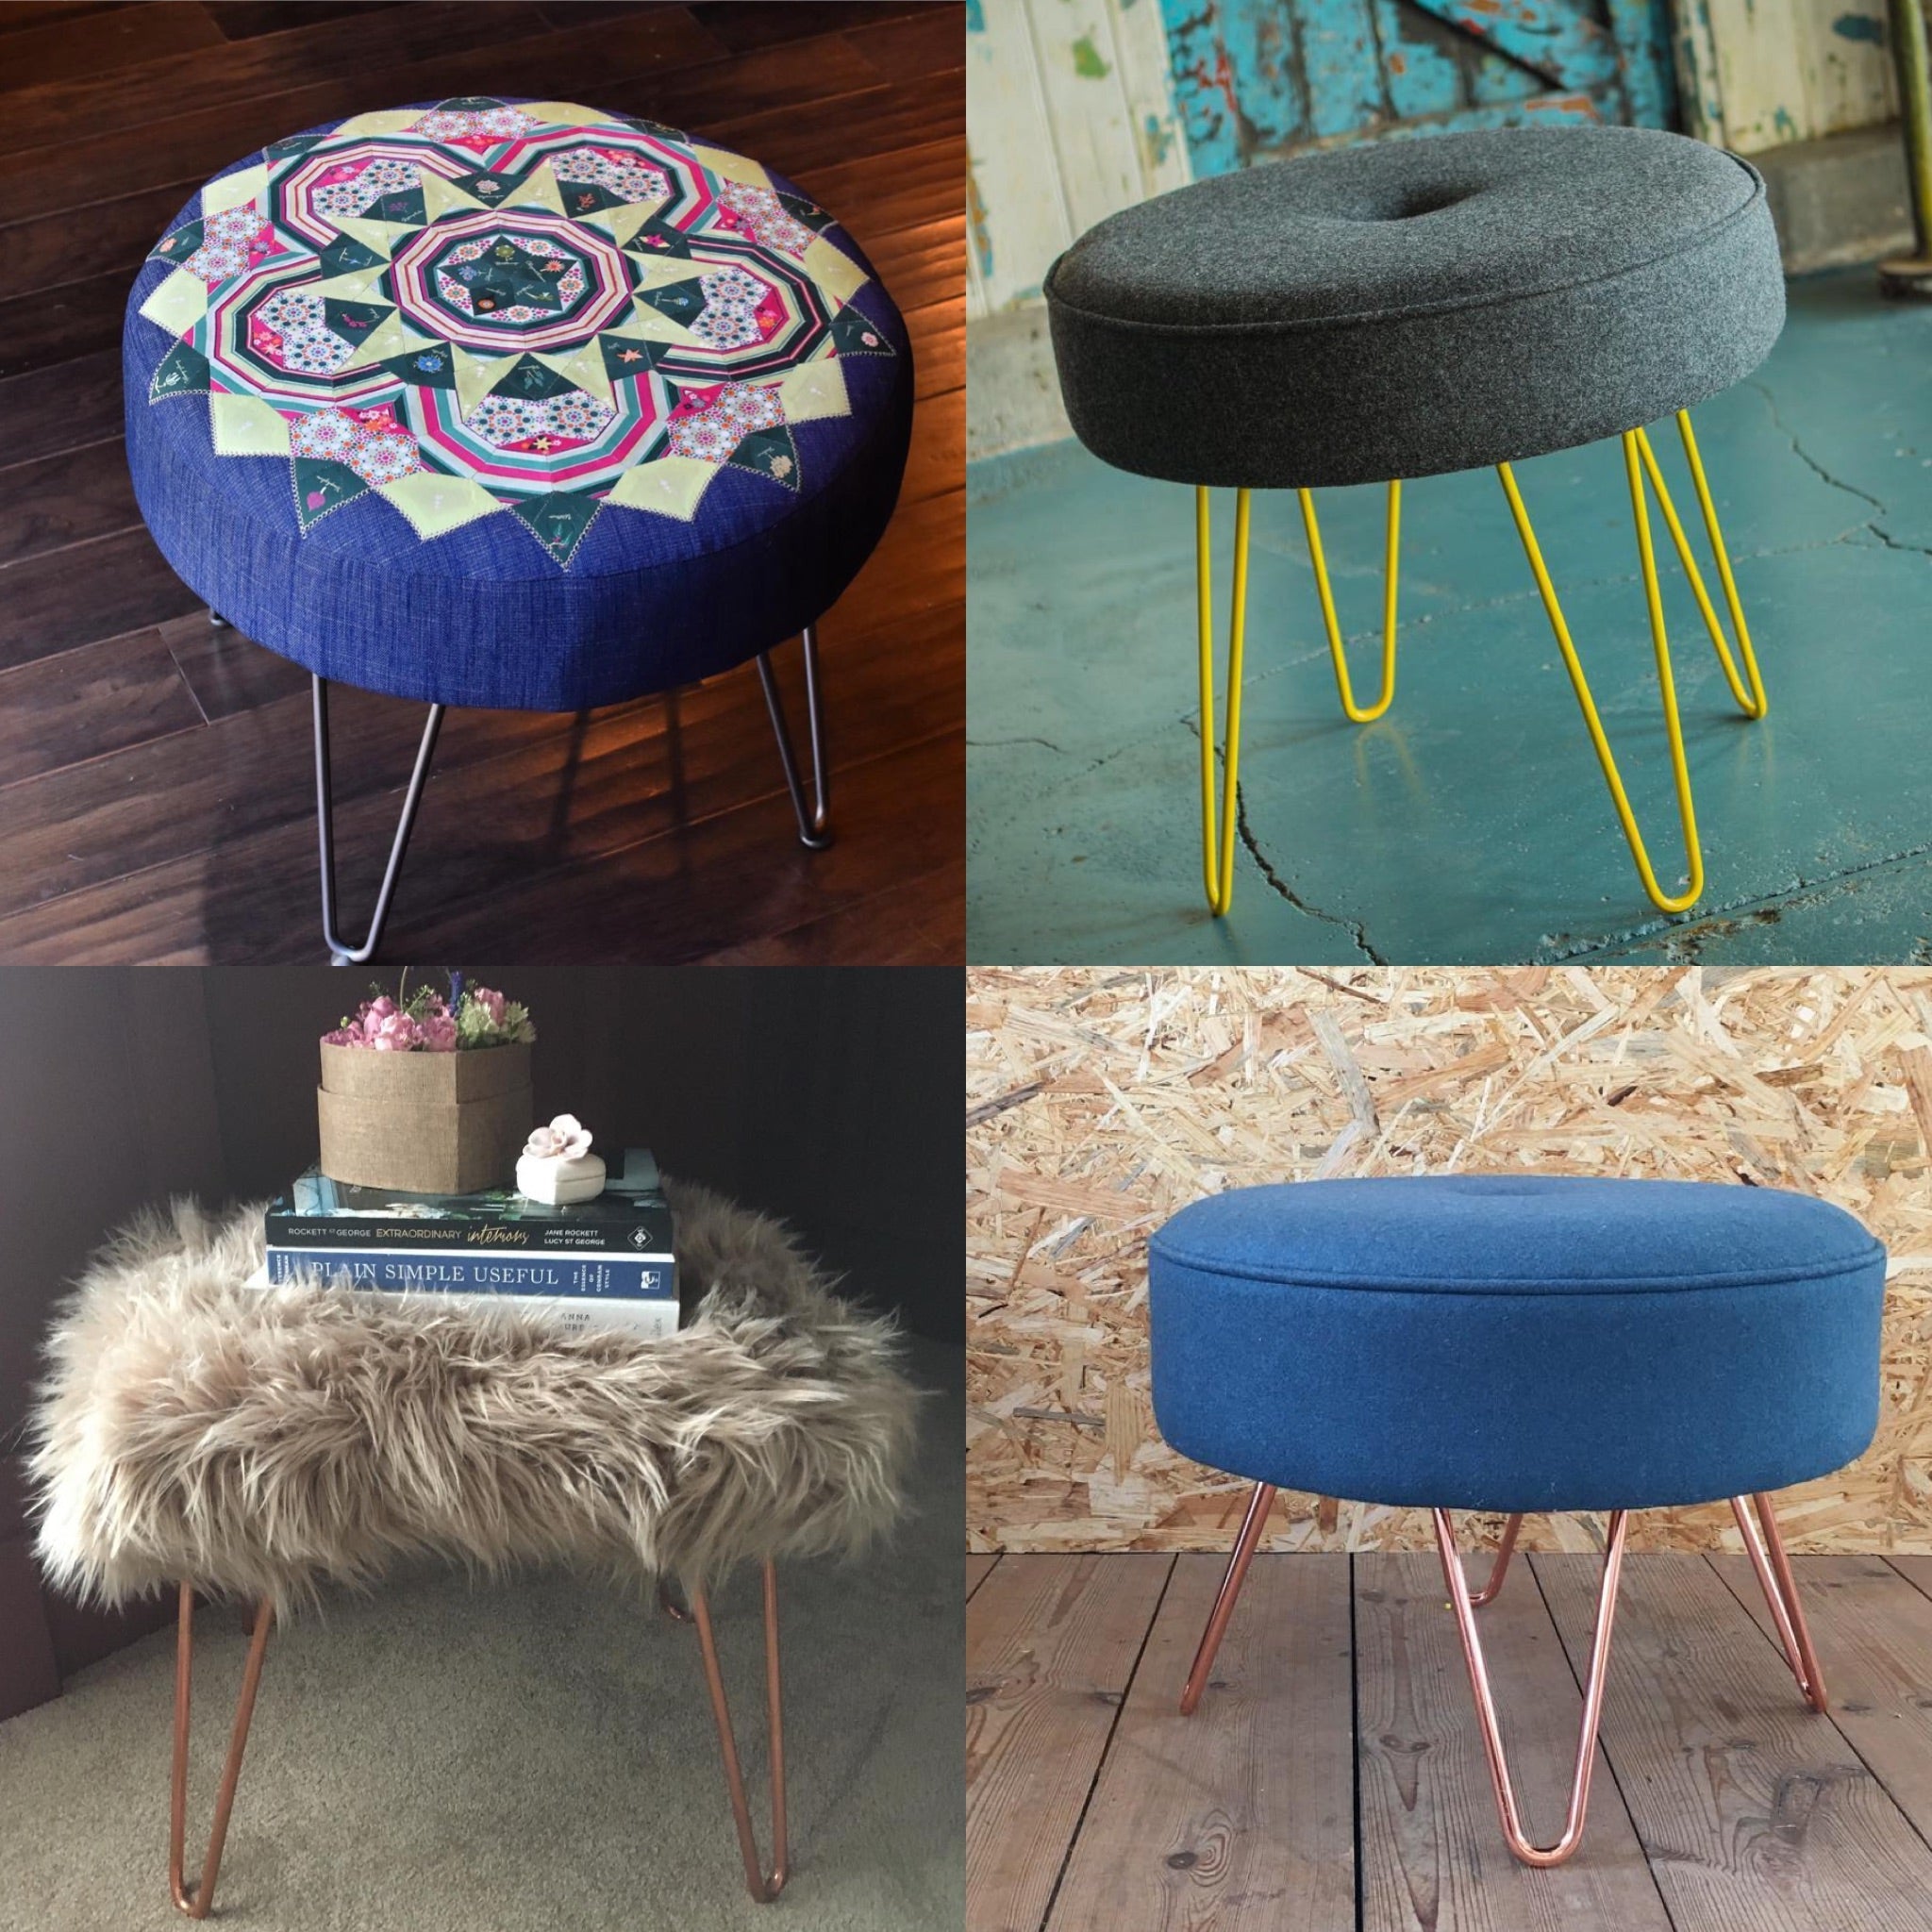 How to make a midcentury footstool you’ll love - The Hairpin Leg Co.